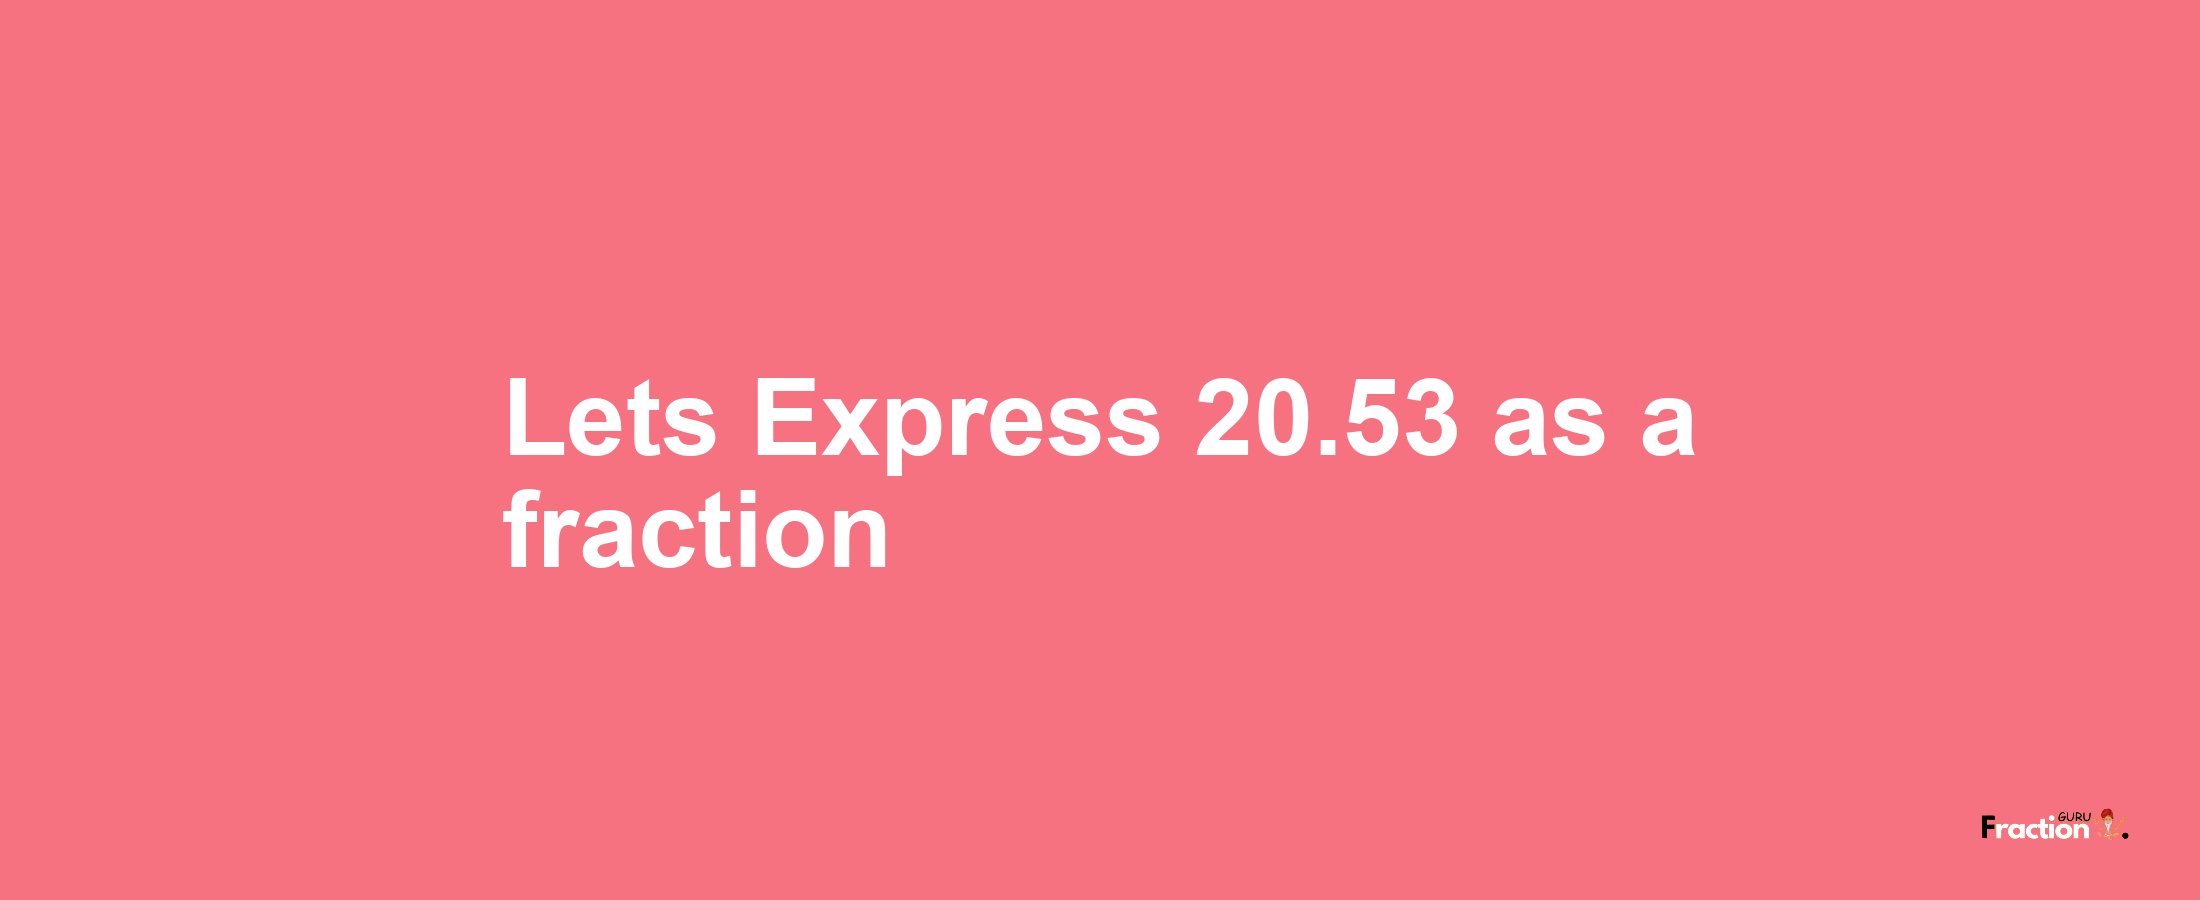 Lets Express 20.53 as afraction